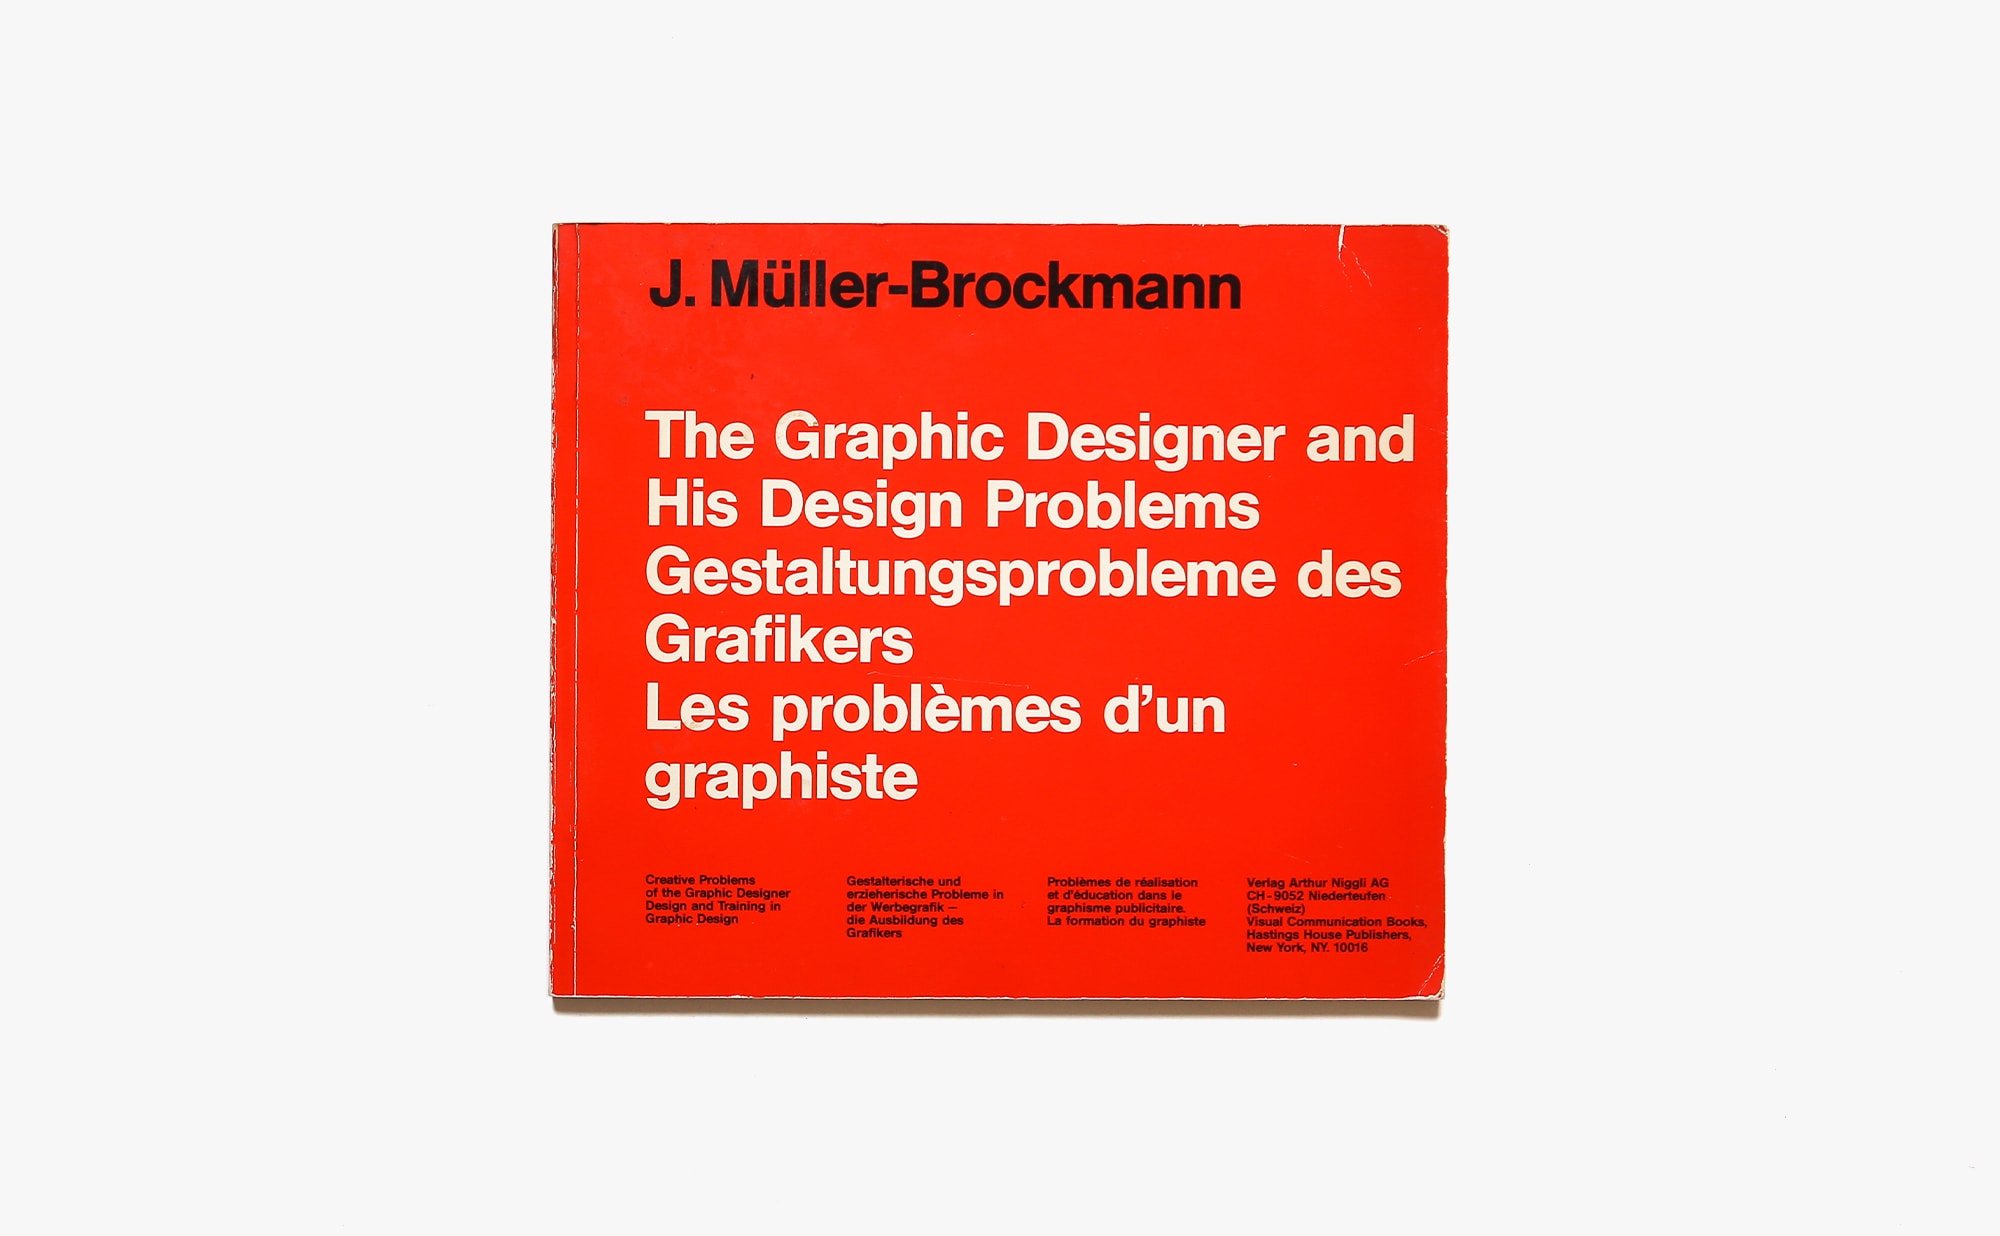 The Graphic Designers and His Design Problems |  J.Muller-Brockmann ヨゼフ・ミューラー＝ブロックマン